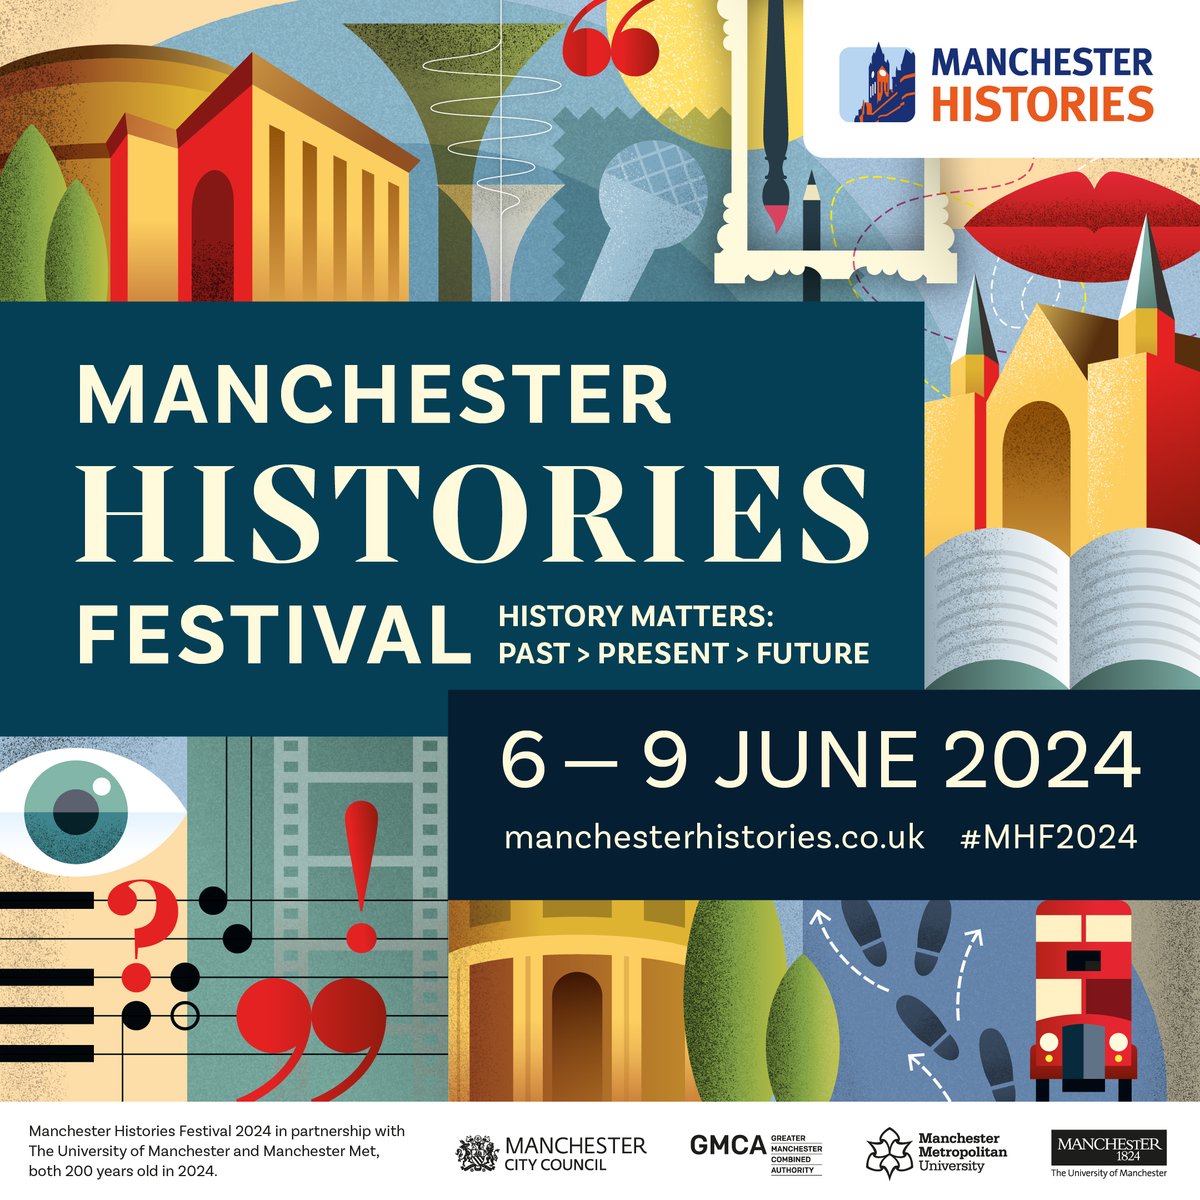 Delighted to be talking at Manchester Histories Festival about 'Made in Manchester - The Story of the City that Shaped the Modern World'. Sunday June 9th 2.30pm. @mcrhistfest #MHF2024 Free event, book here: manchesterhistories.co.uk/events/day-4-s…